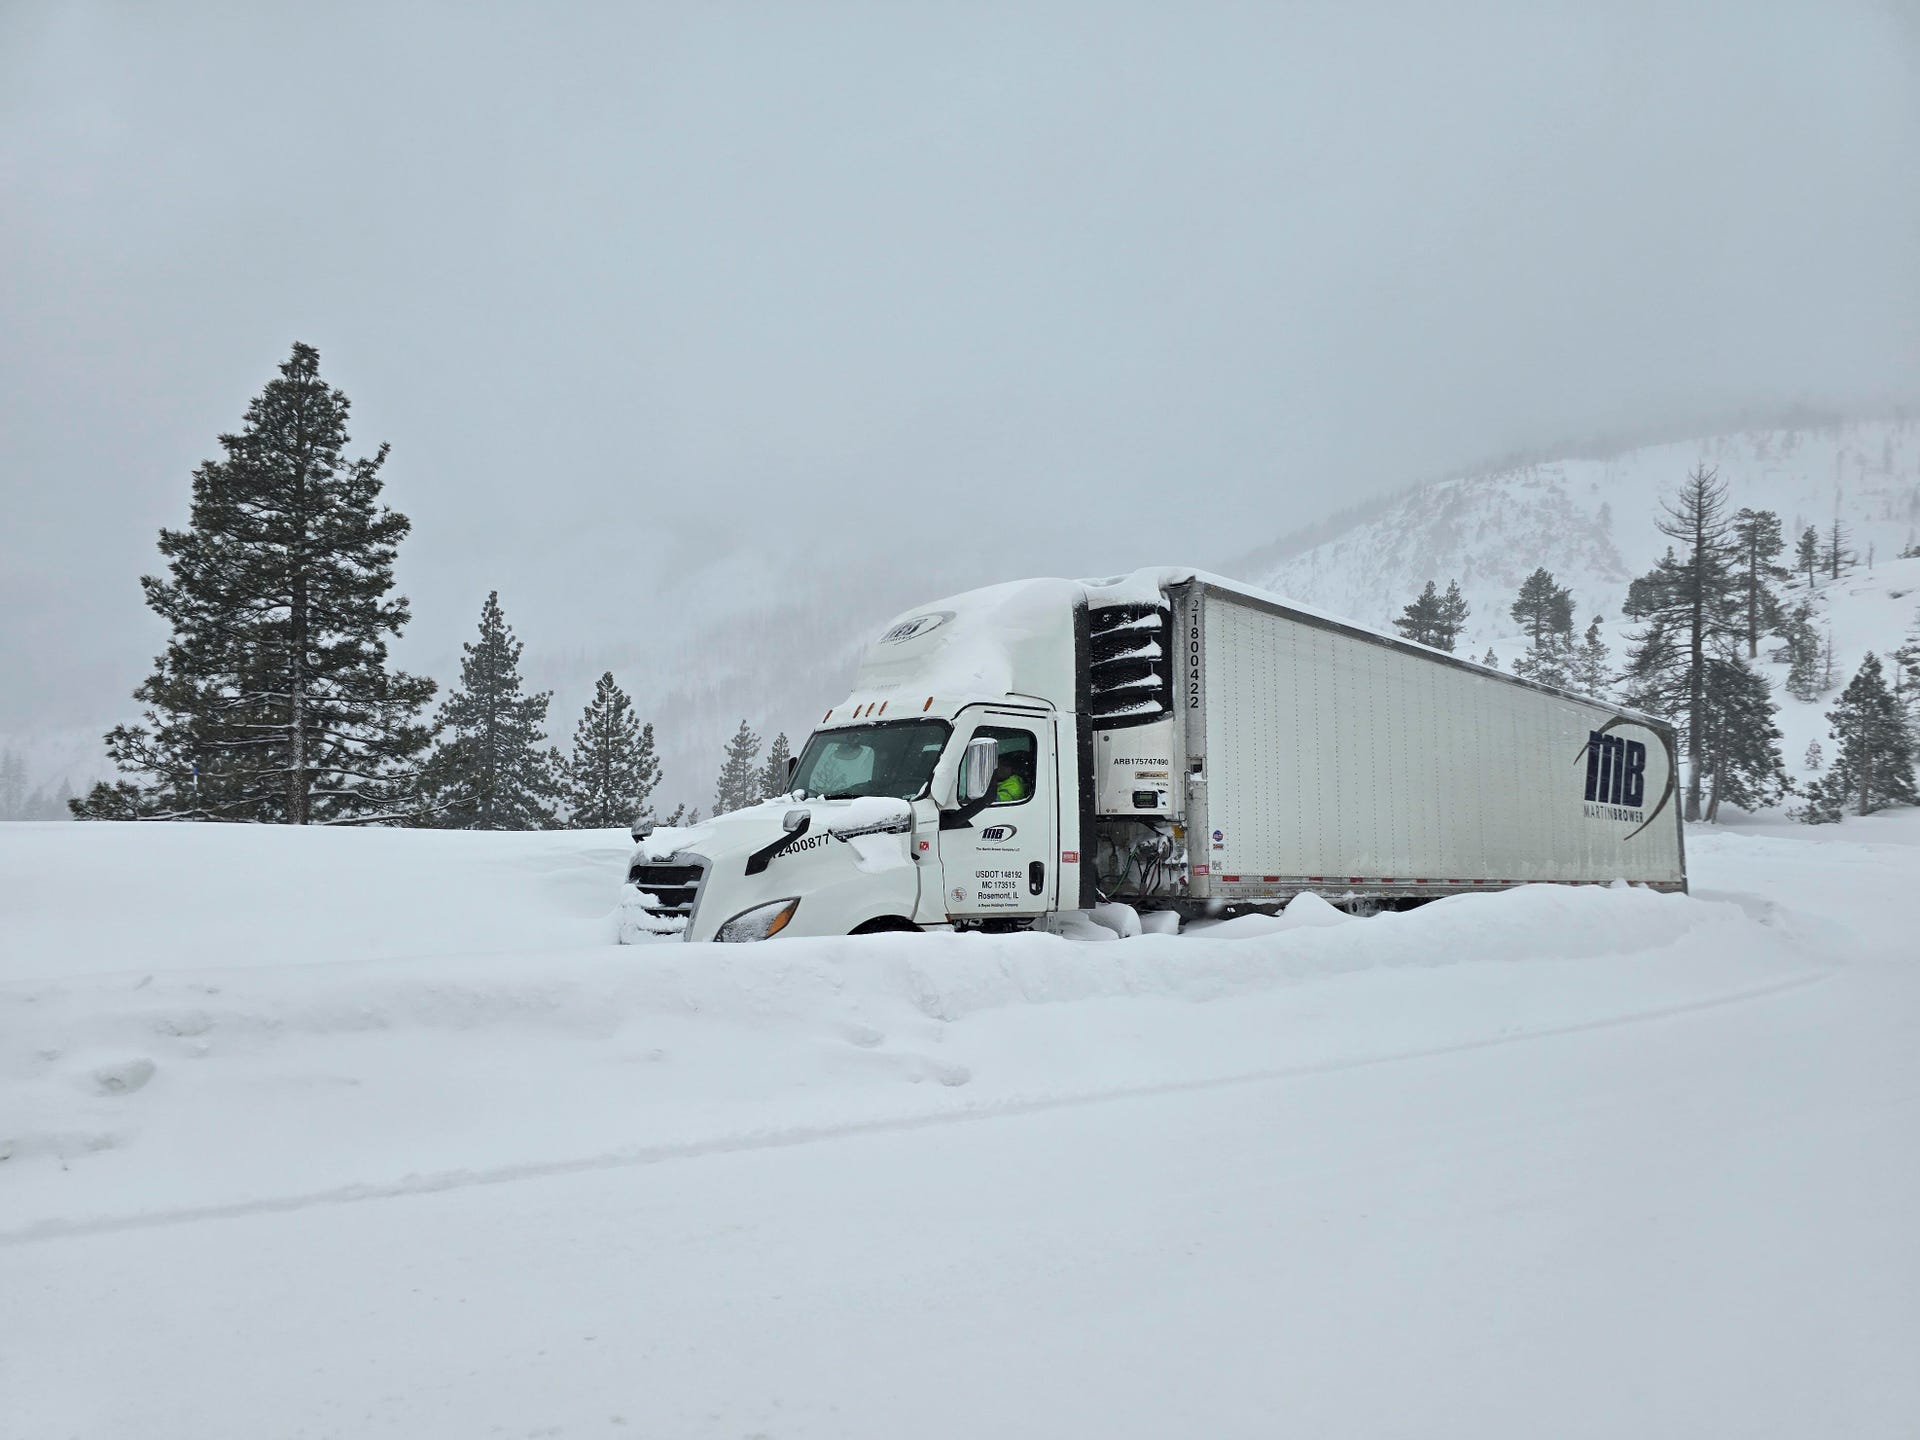 Snowed in tractor trailer truck on Interstate 80 as a blizzard shut down travel across the Sierra Nevada mountains